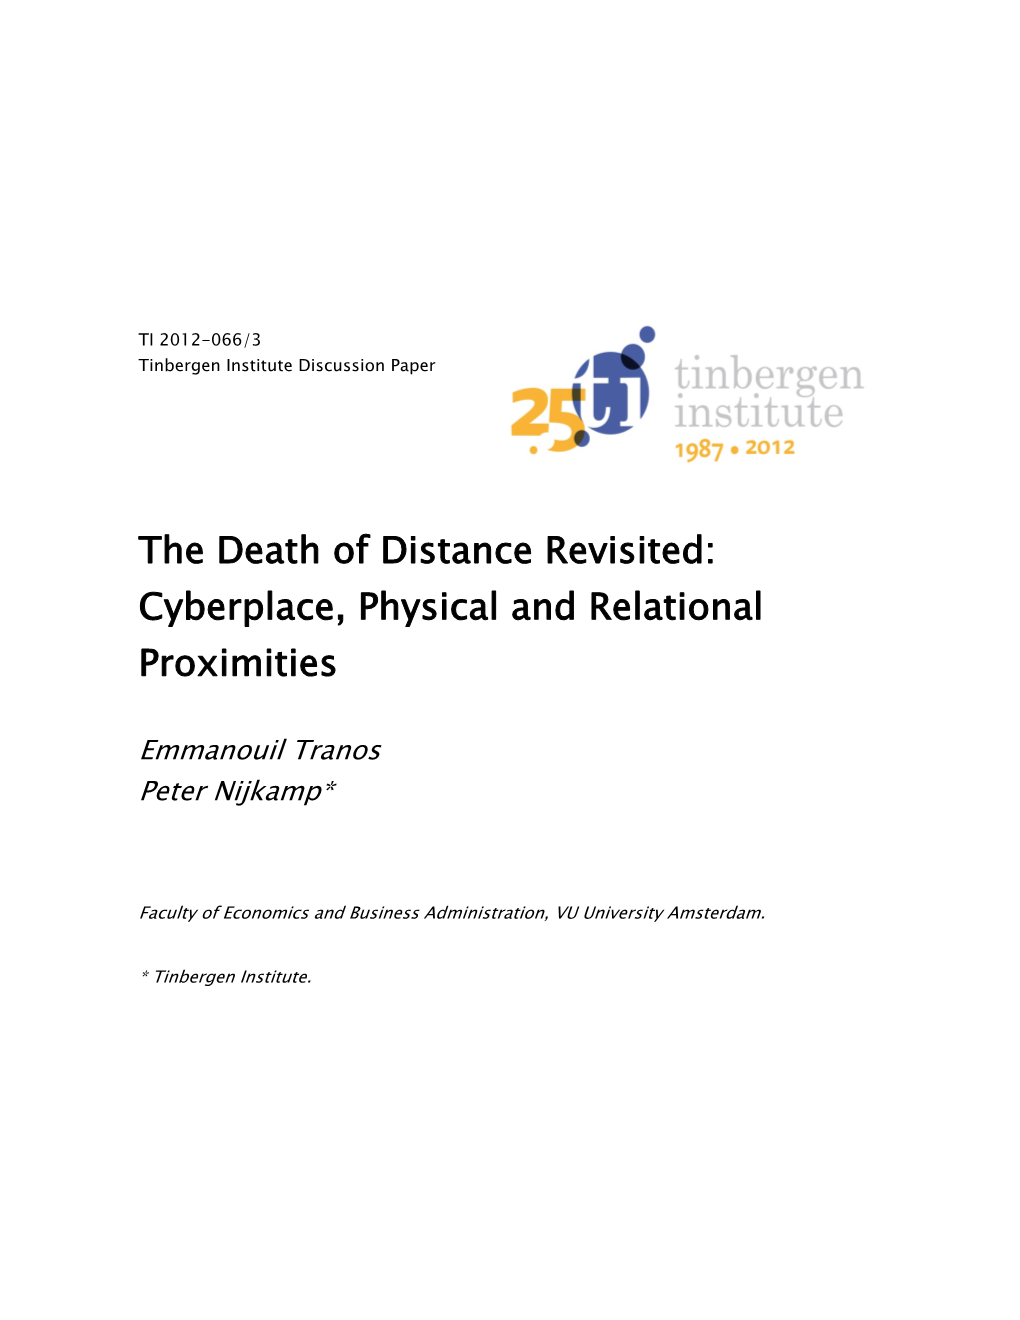 The Death of Distance Revisited: Cyberplace, Physical and Relational Proximities